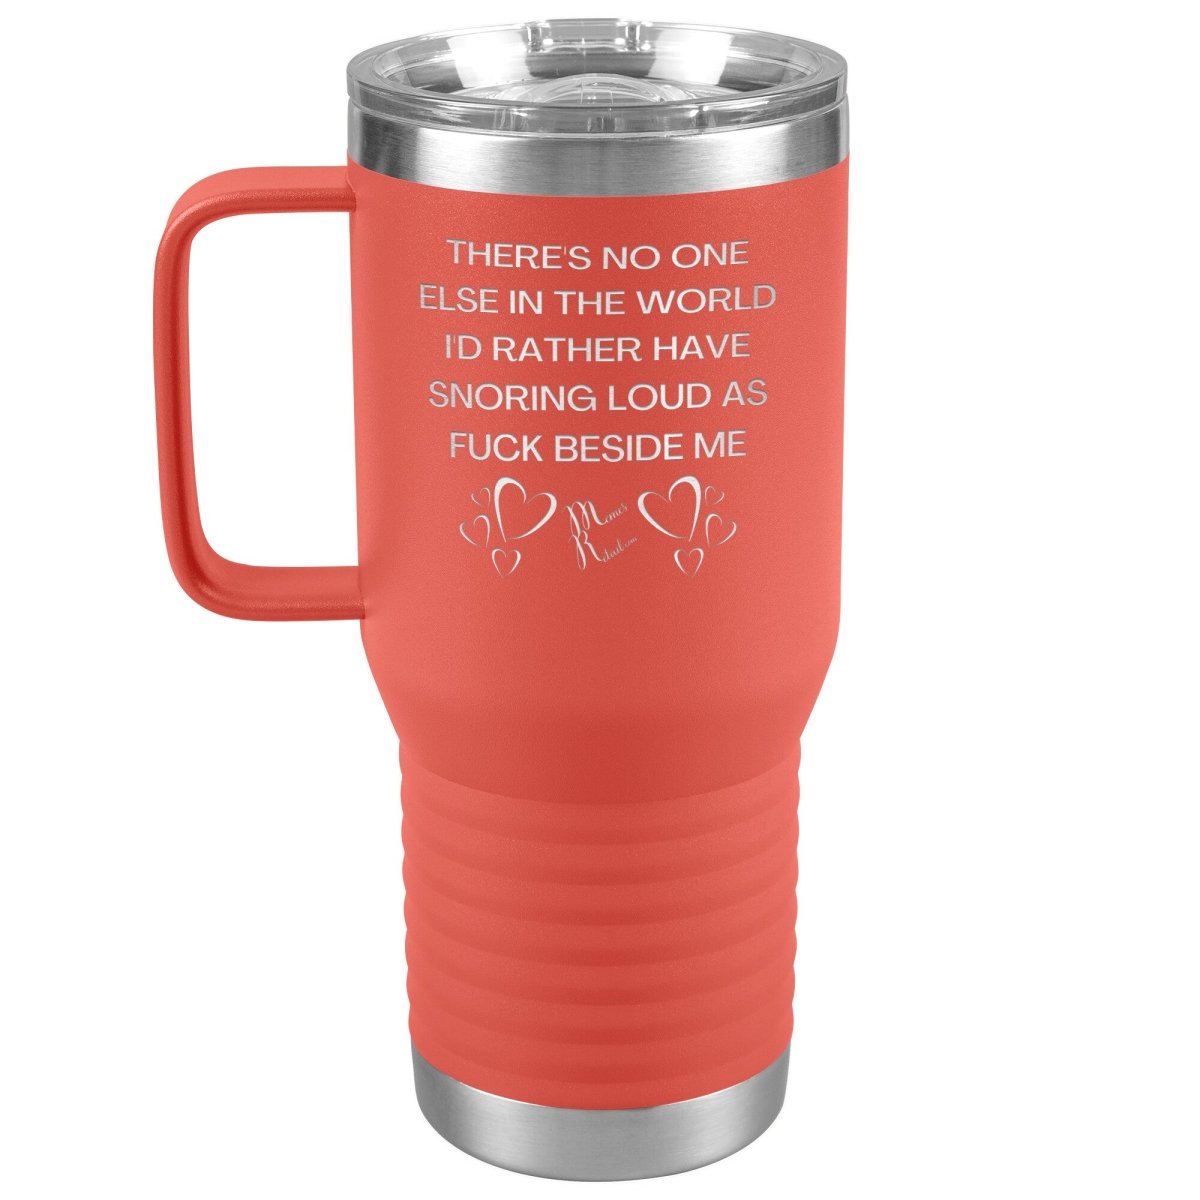 There's No One Else in the World I'd Rather Have Snoring Loud, 20oz Travel Tumbler / Coral - MemesRetail.com